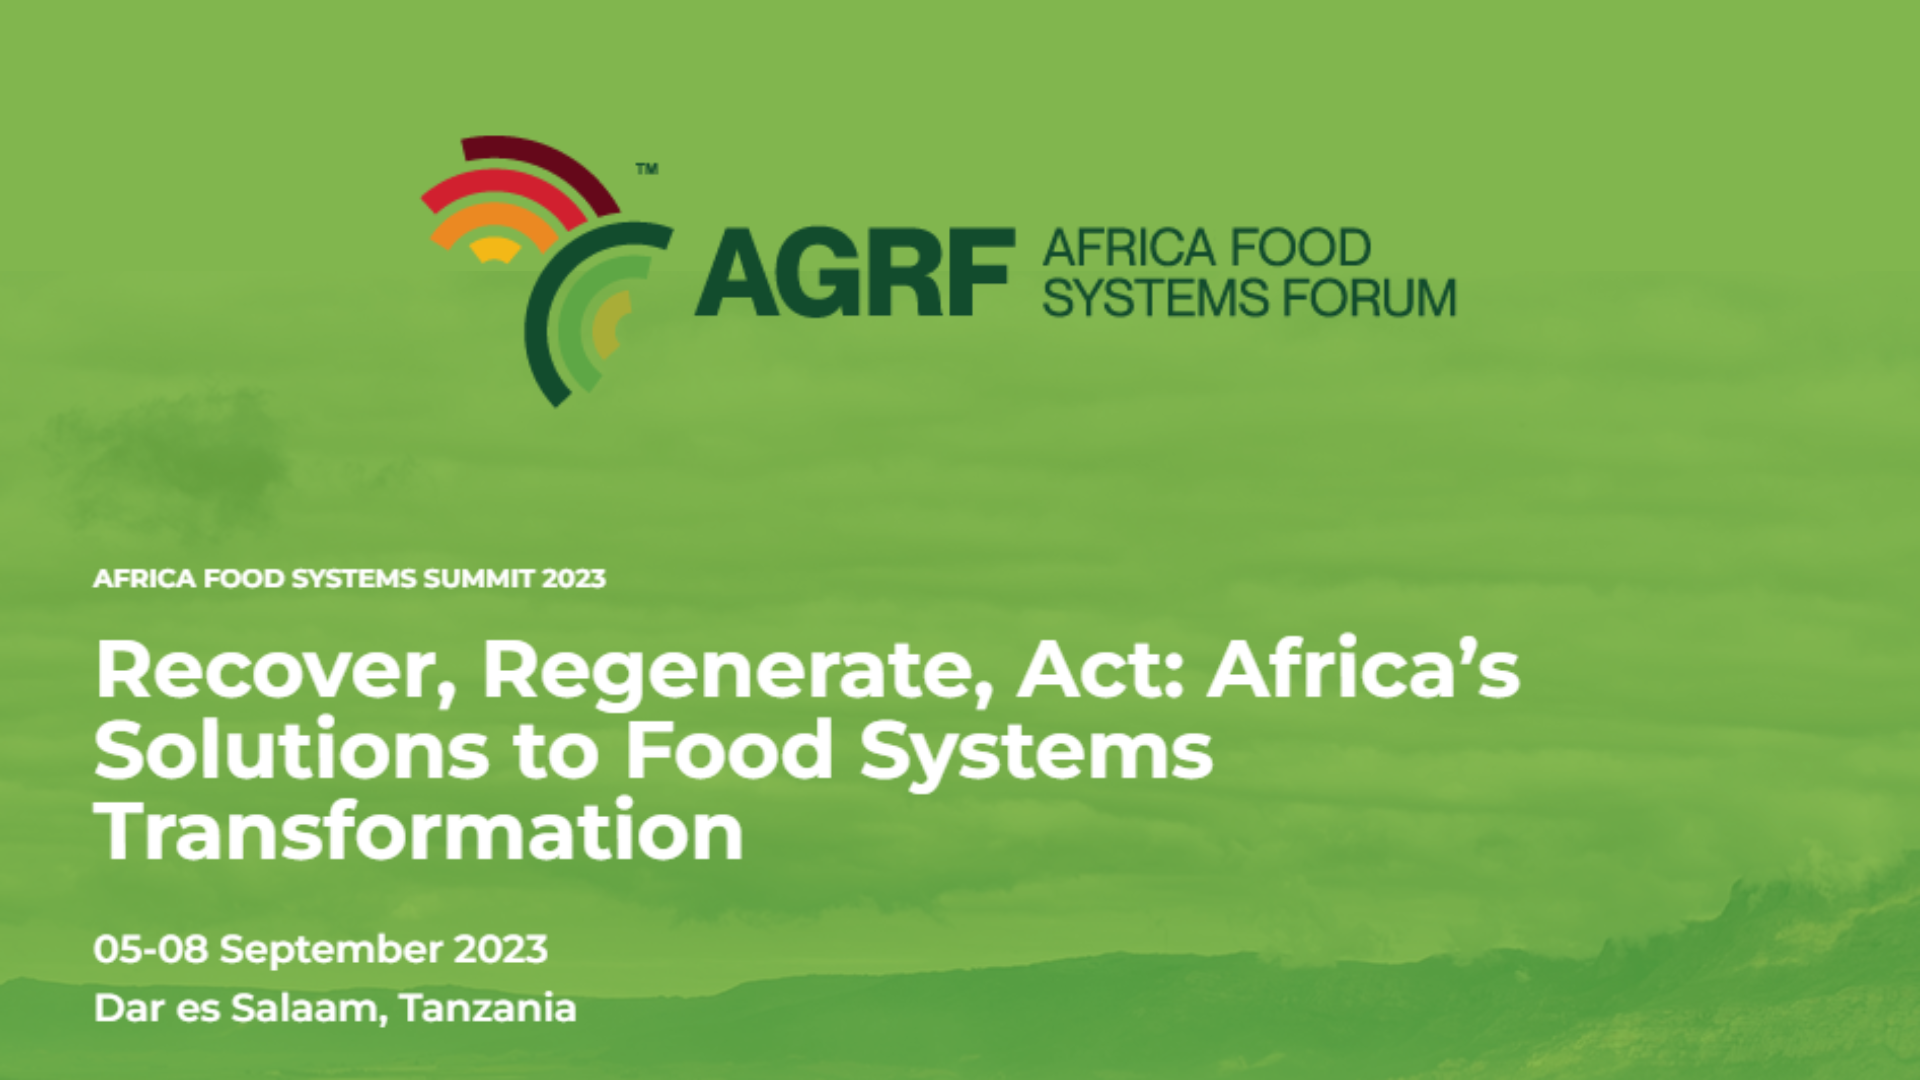 Africa Food Systems Forum 2023